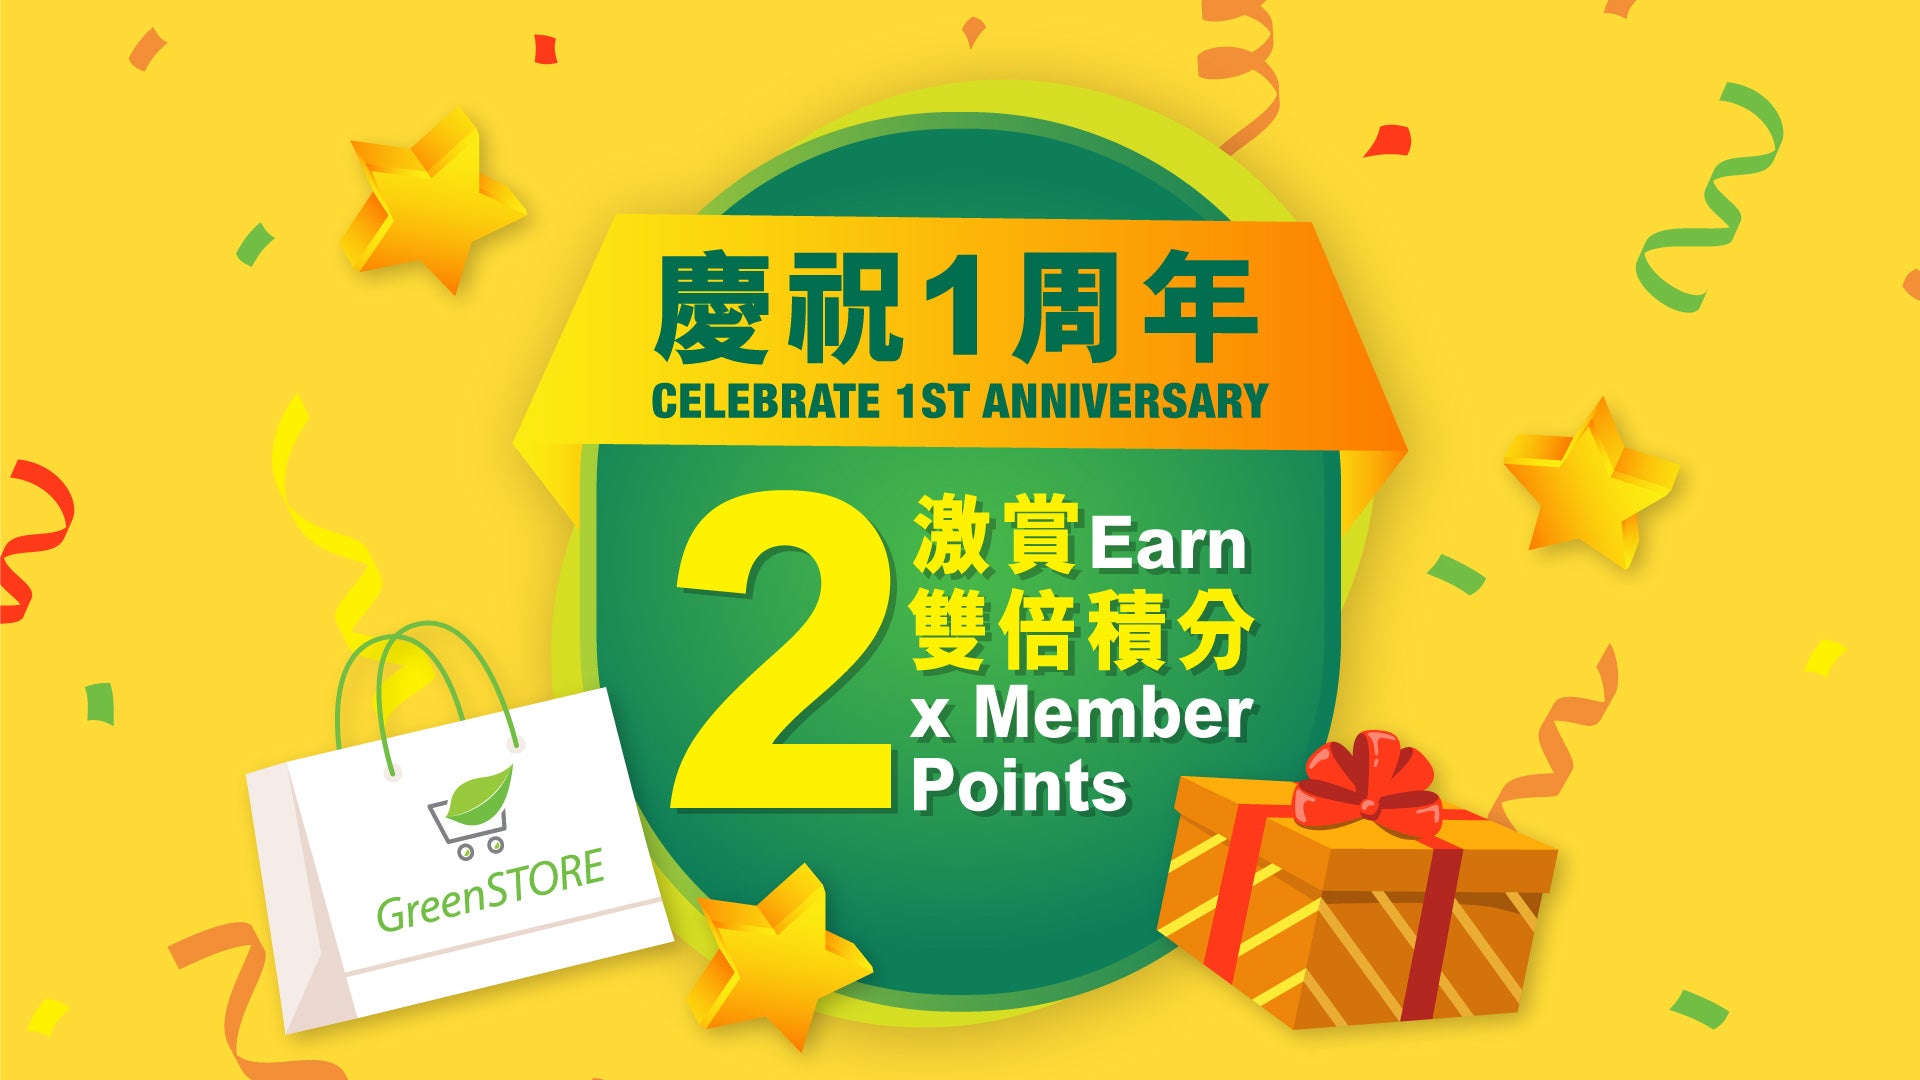 【2x Points】Celebrating 1st Year<br>Anniversary of New-look GreenSTORE